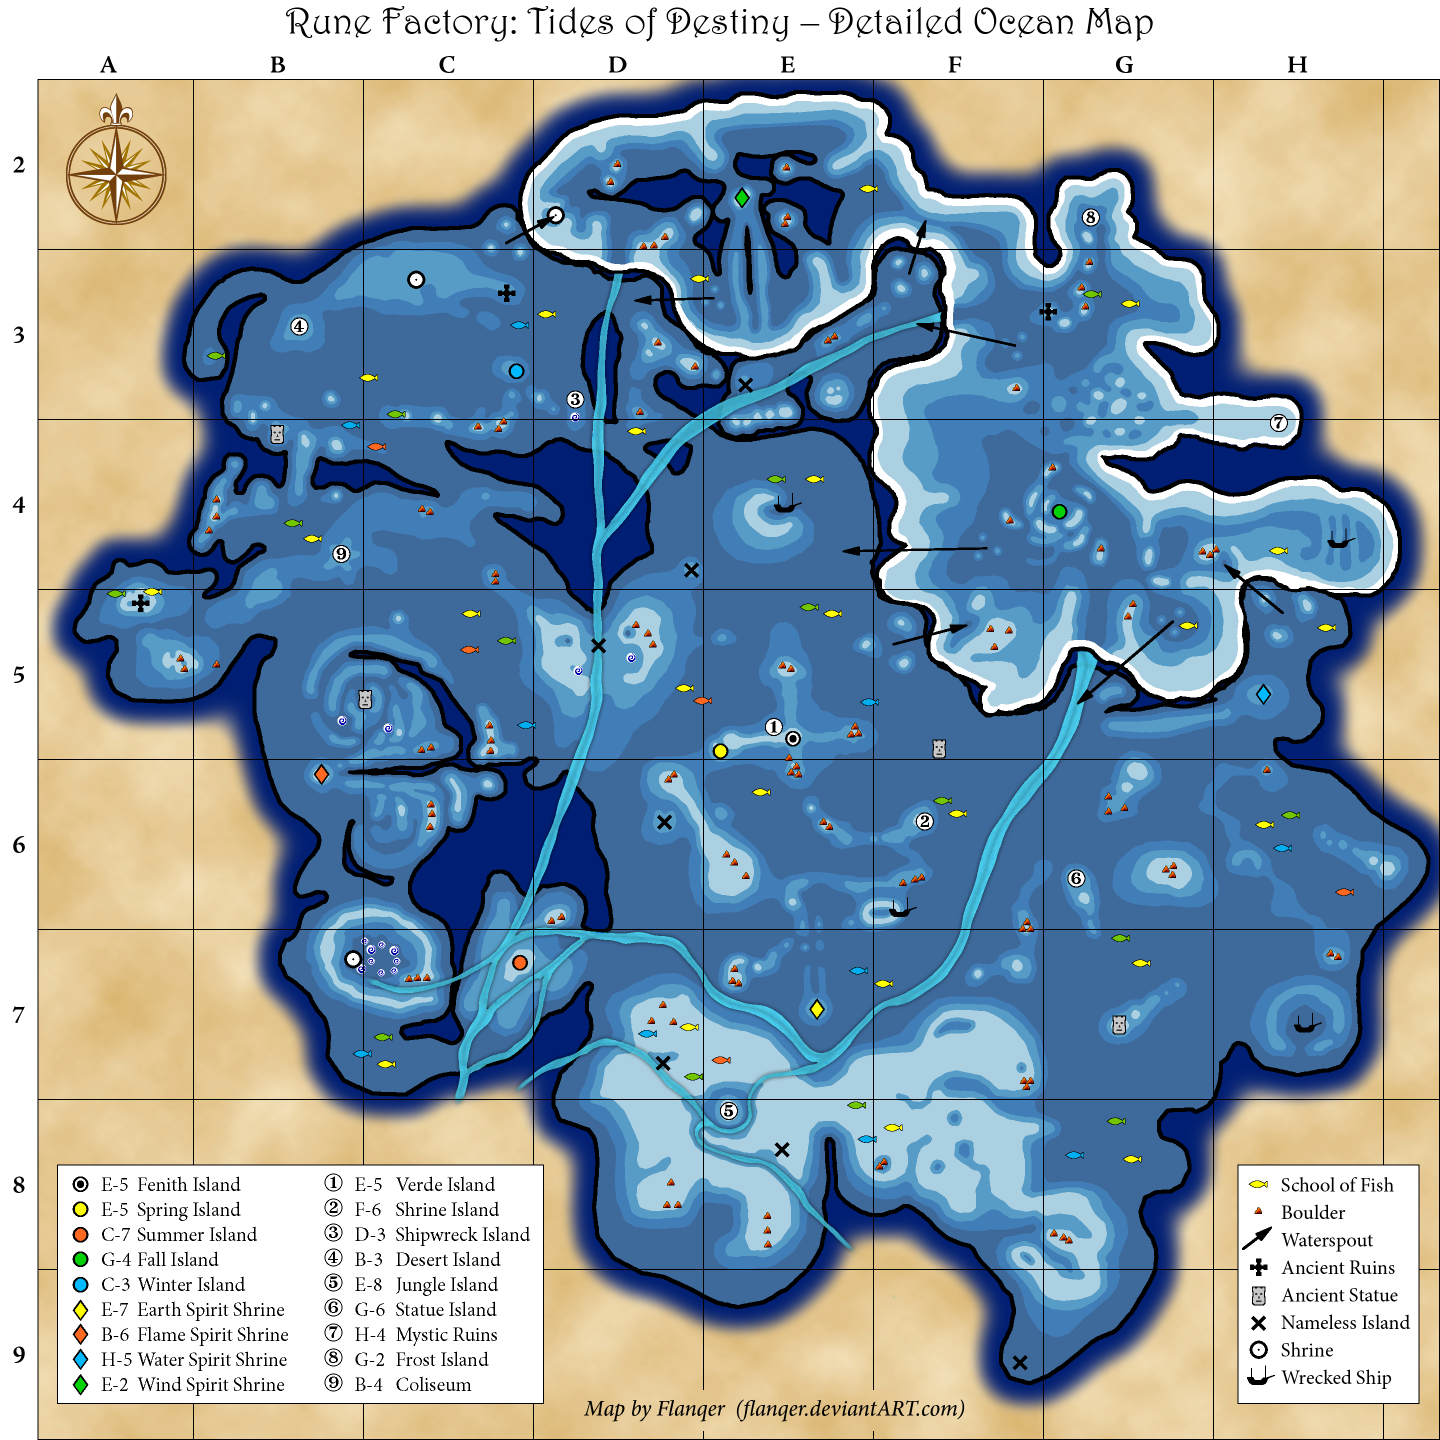 Rune Factory Tides of Destiny Map by Flanqer on DeviantArt